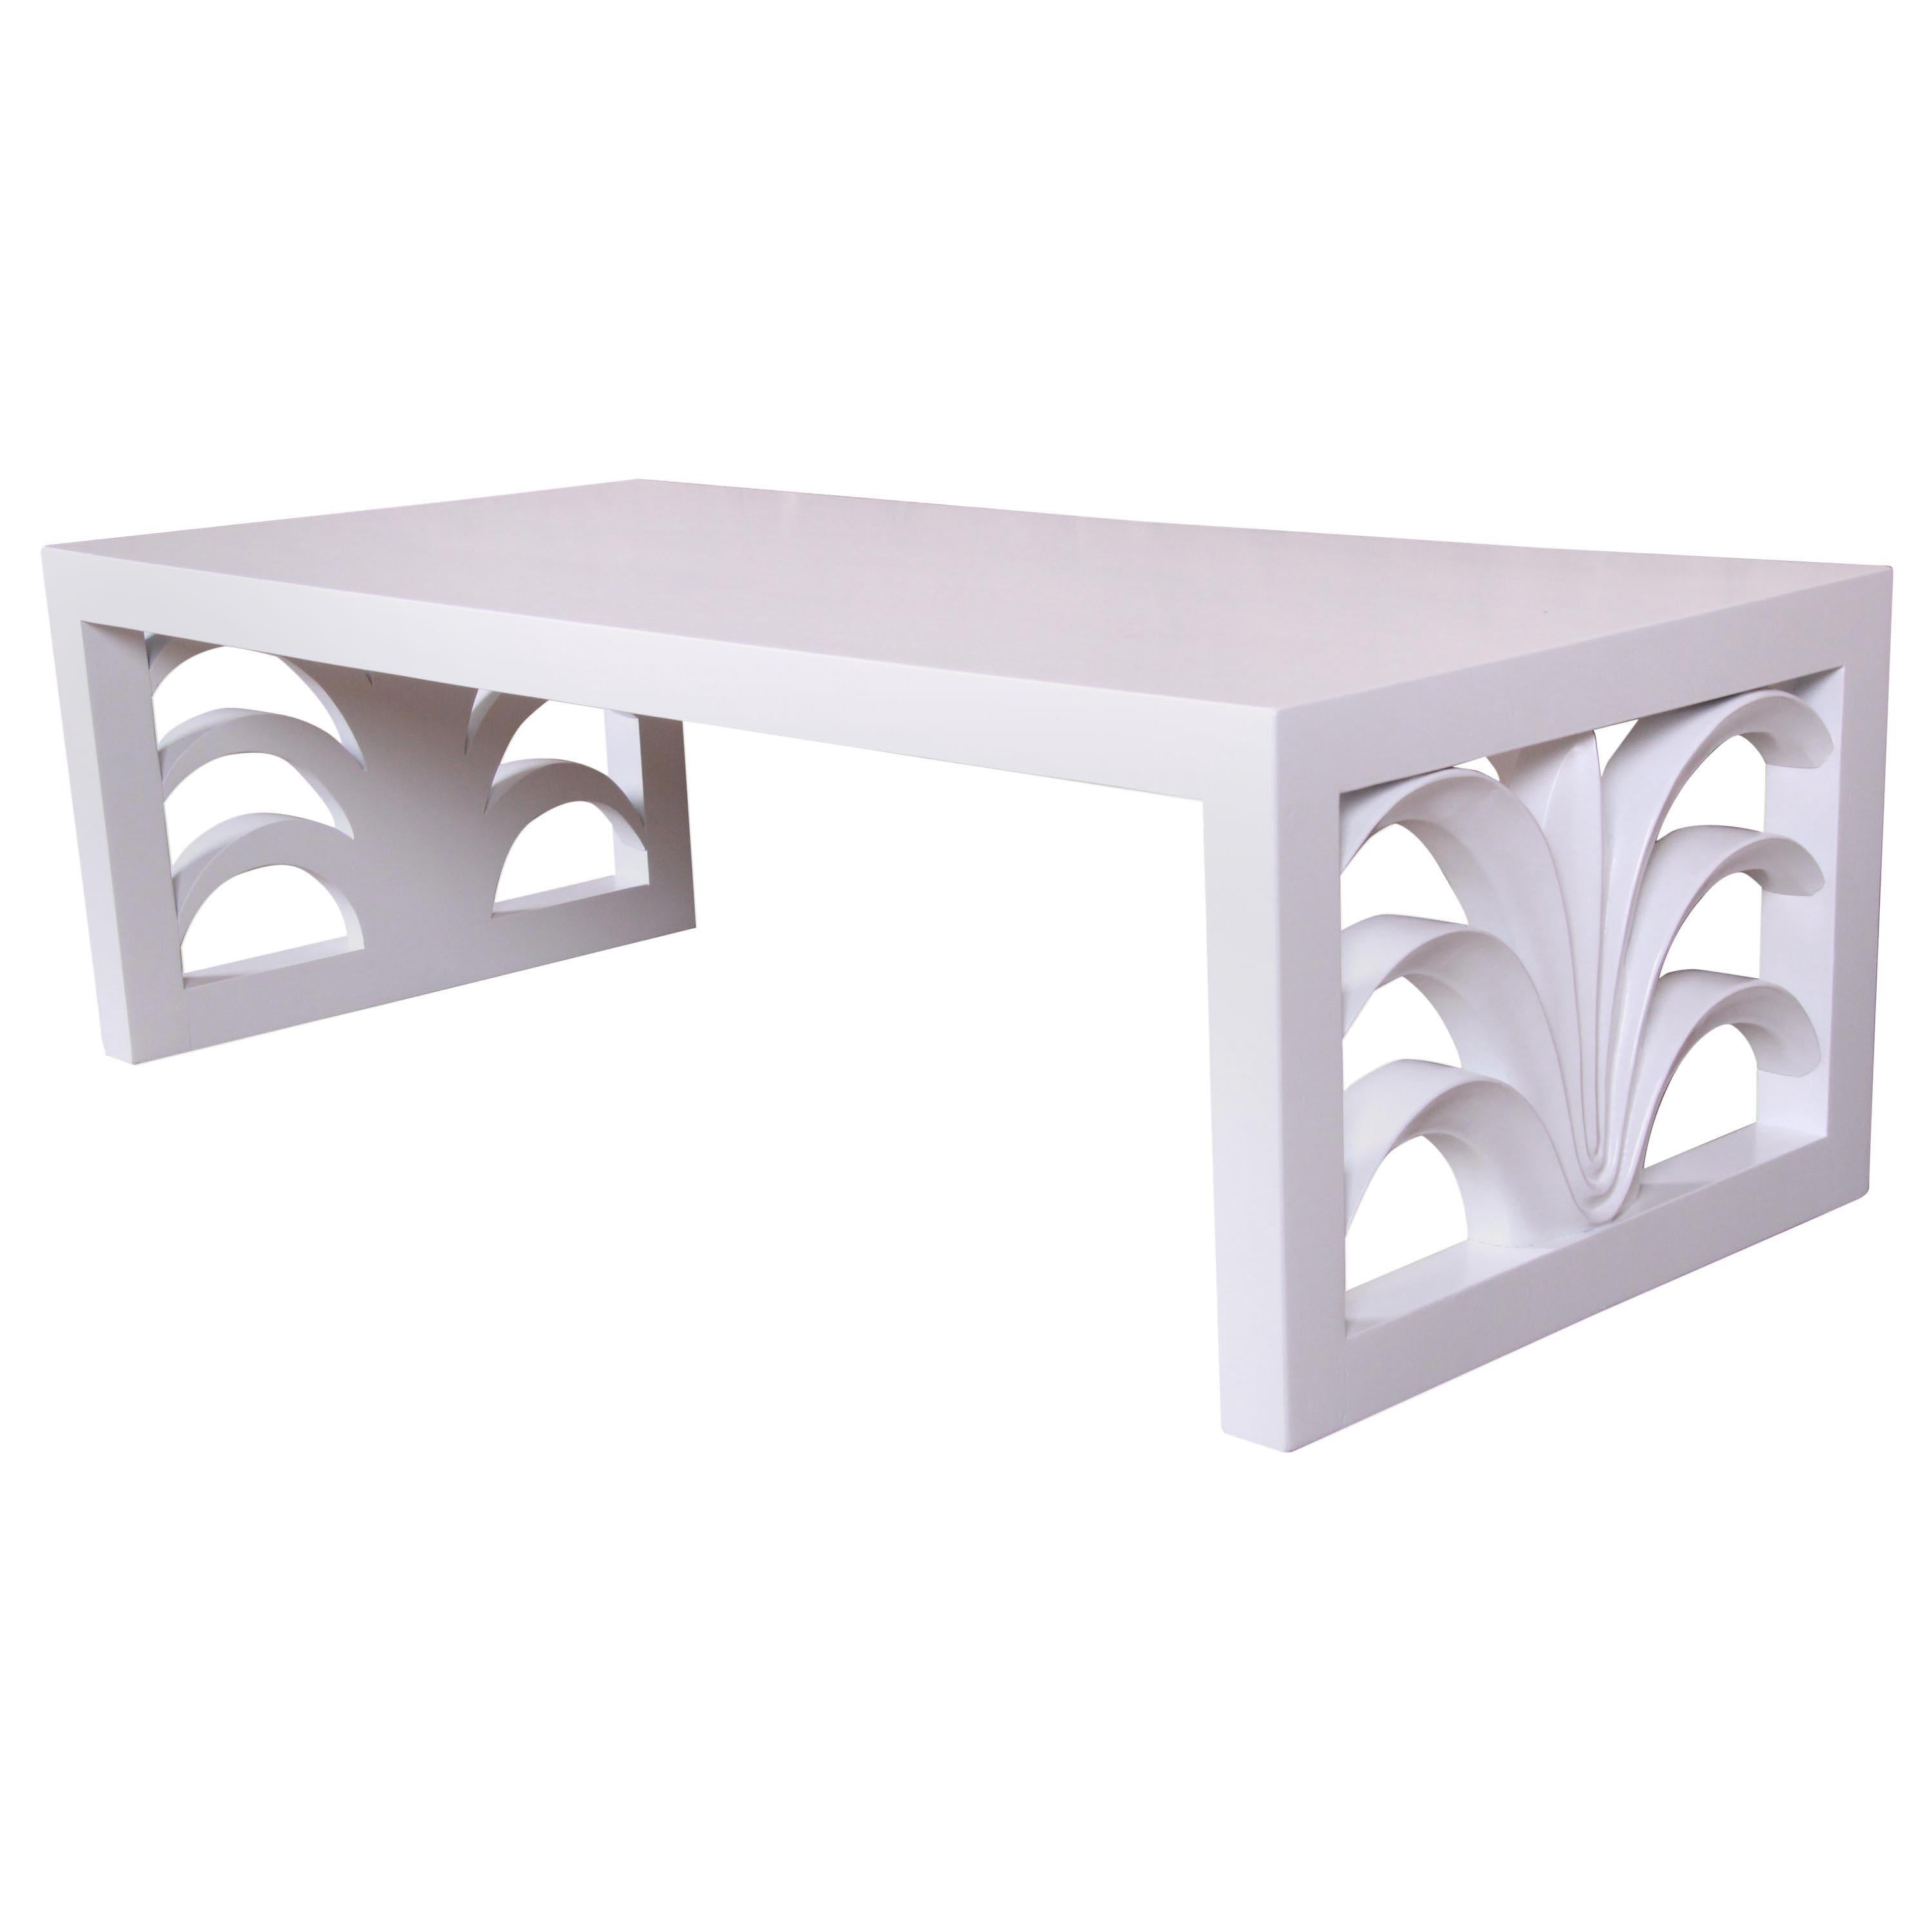 Robsjohn-Gibbings for Widdicomb White Lacquered Palm Leaf Coffee Table, Restored